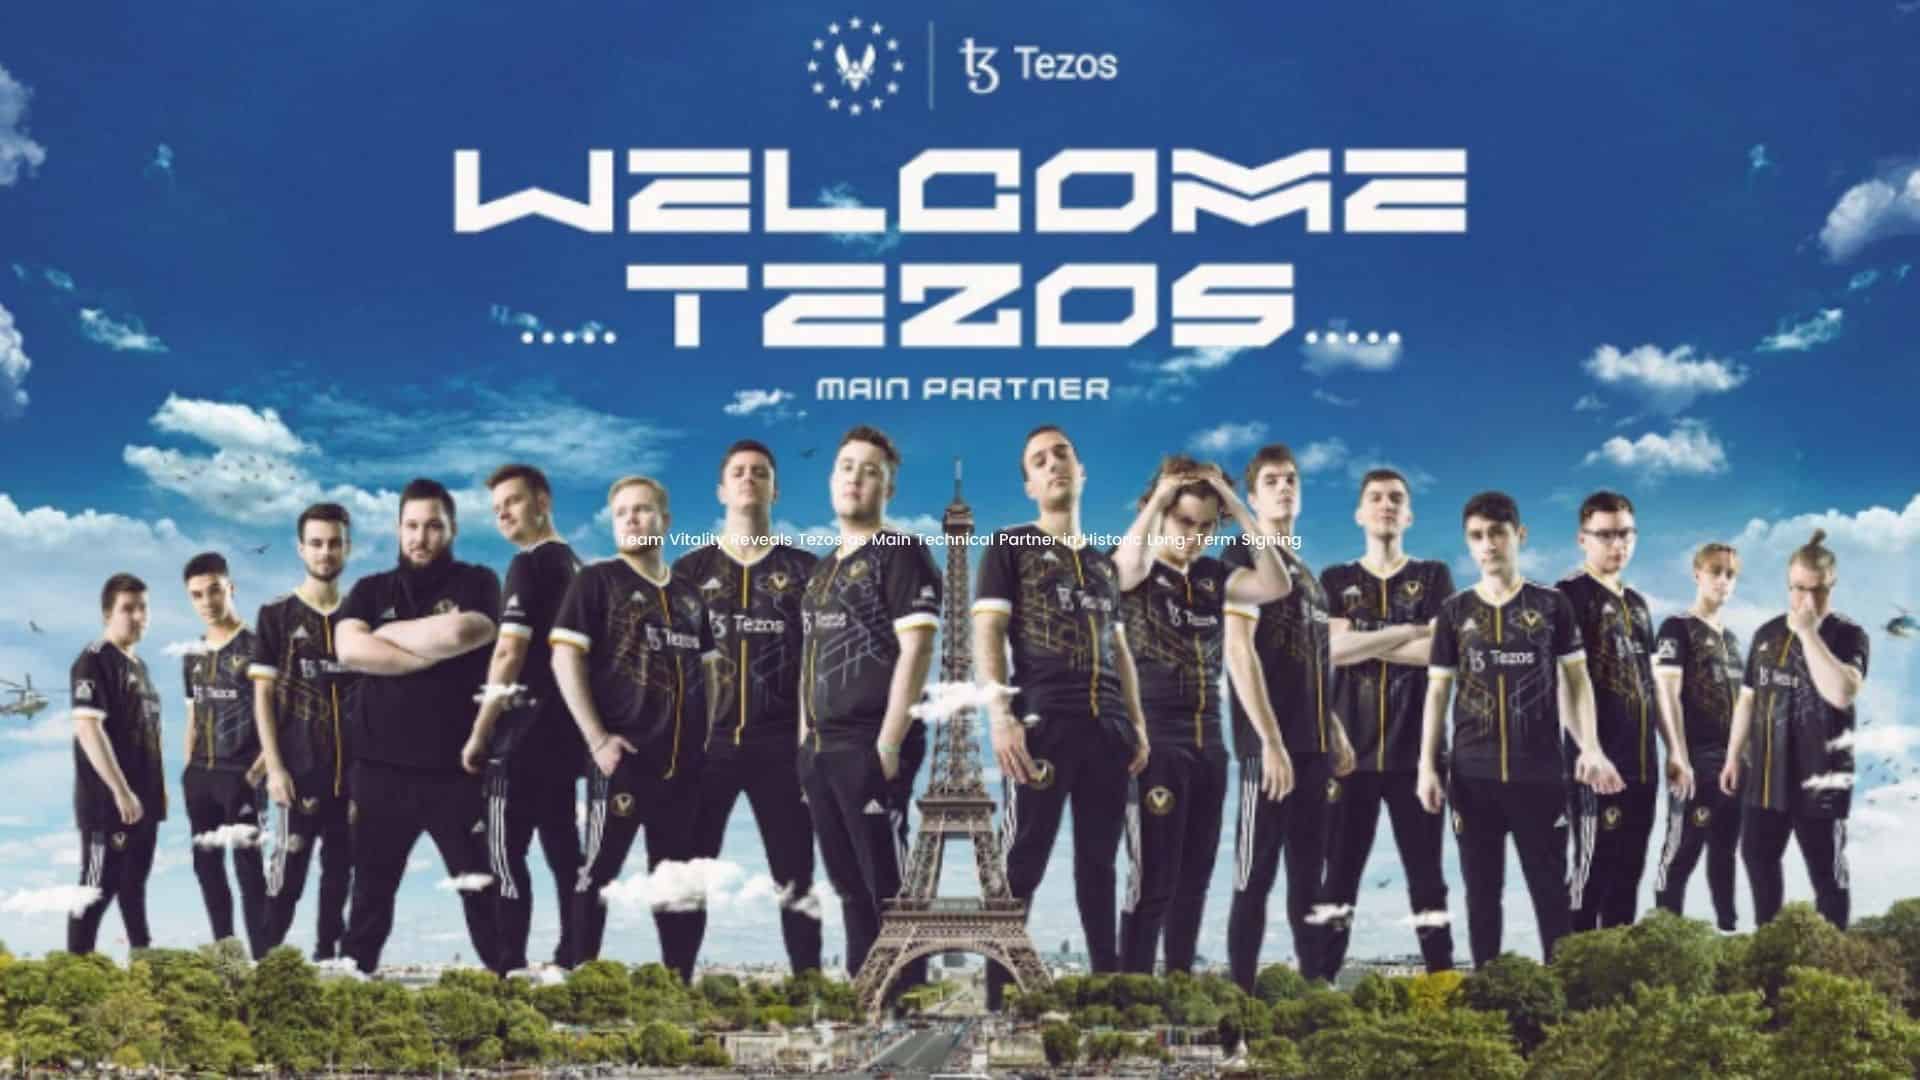 Team Vitality Reveals Tezos as Main Technical Partner in Historic Long-Term Signing